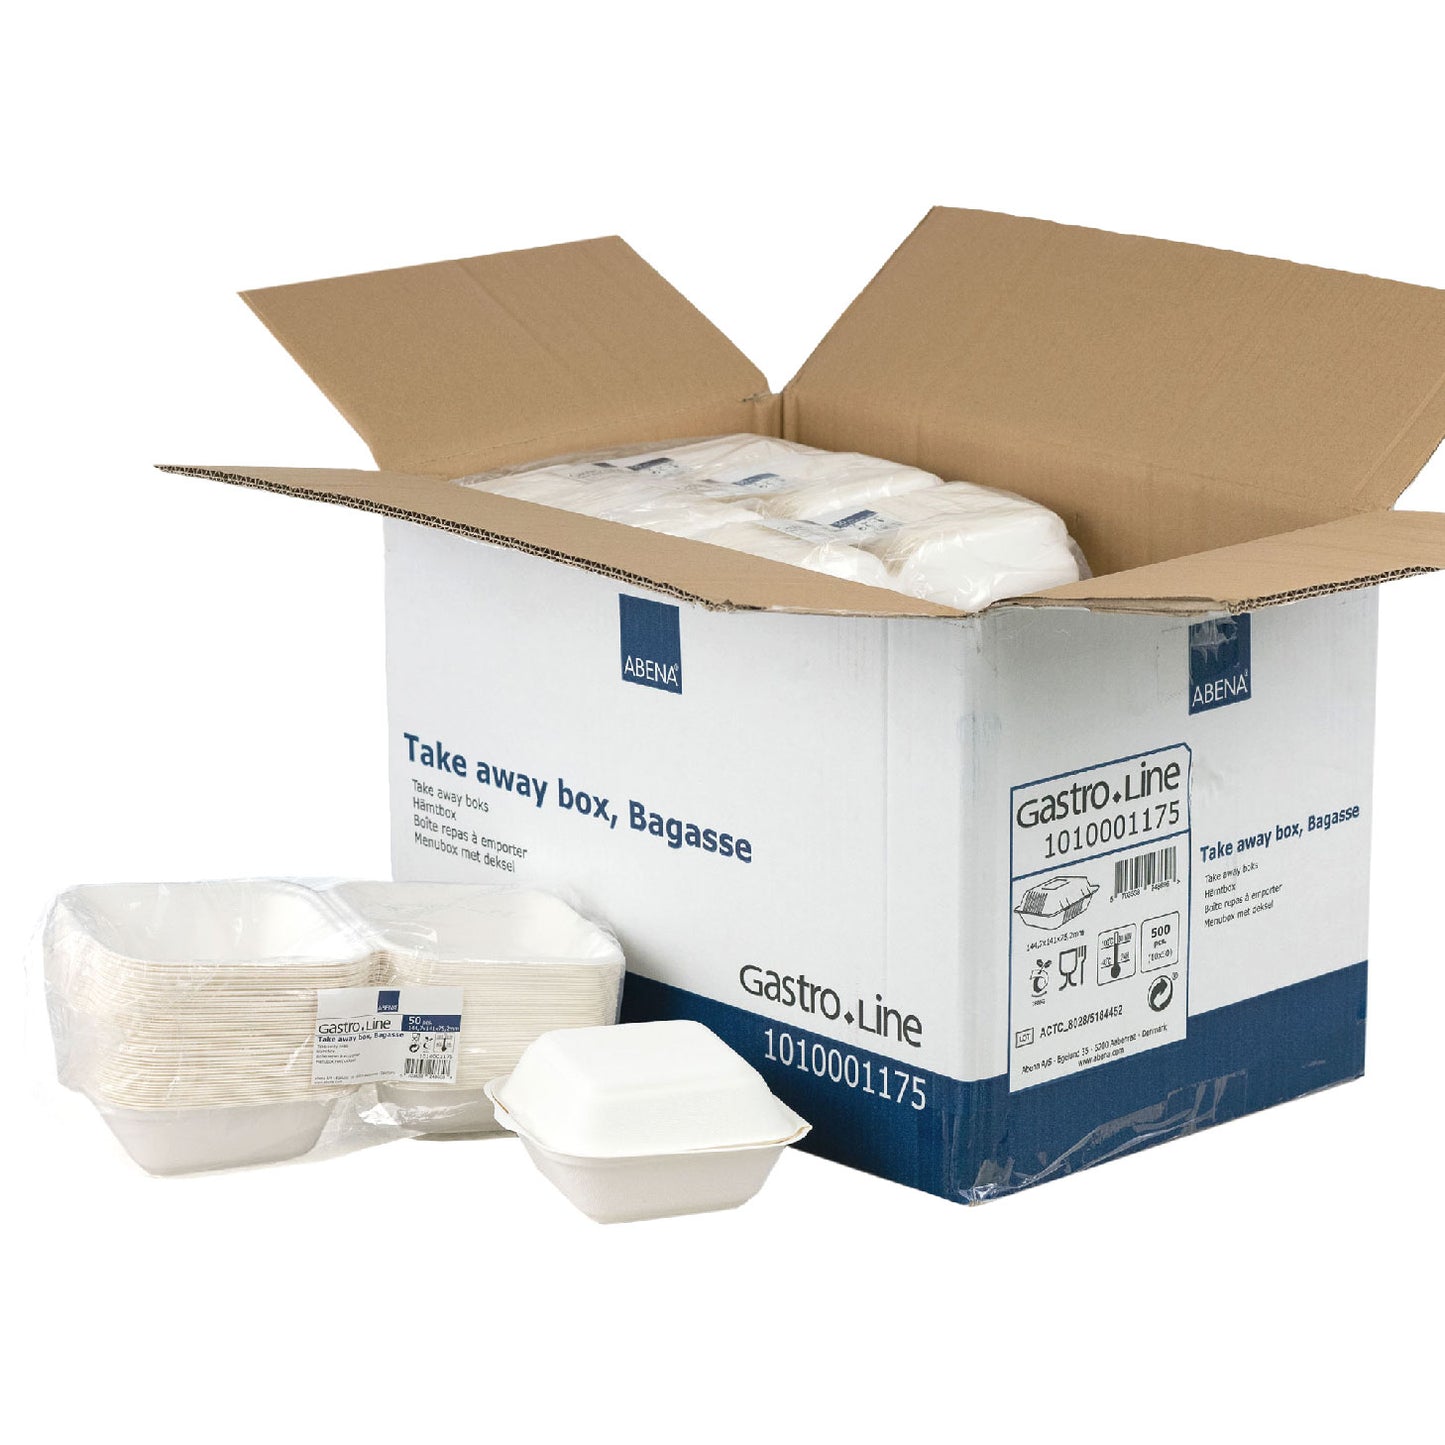 100% Compostable Bagasse Clam Shell To-Go Containers